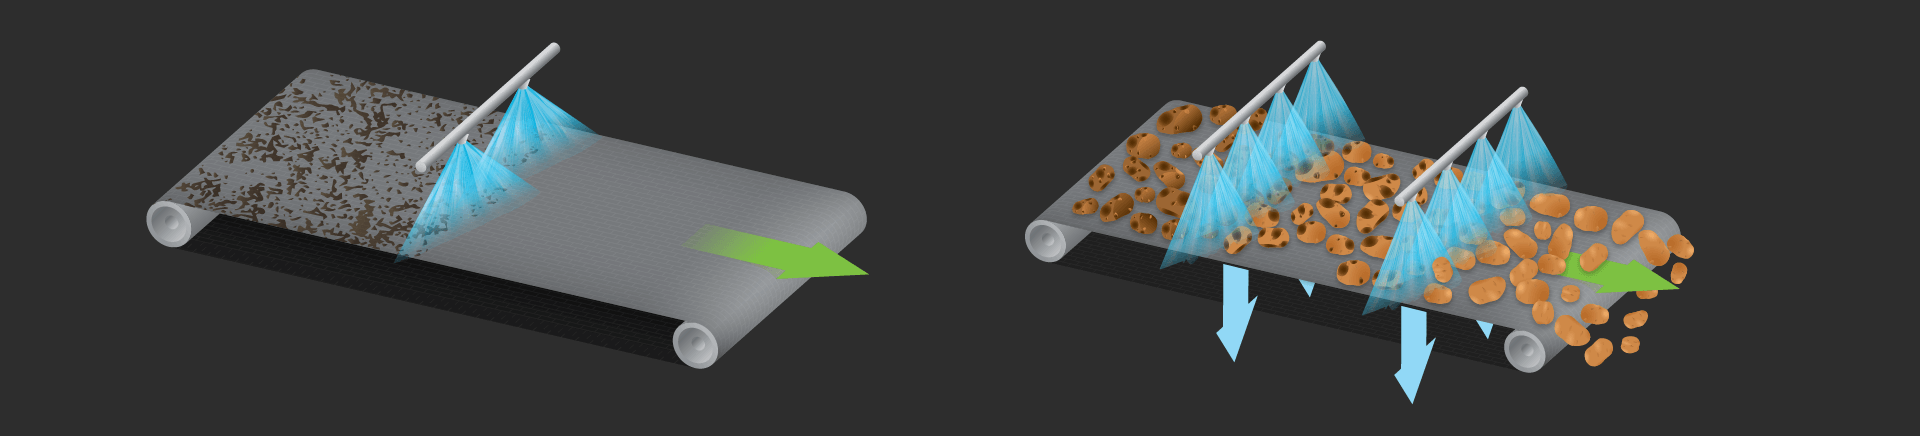 Two illustrations showing headers with nozzles spraying to clean conveyors and produce in processing plants.